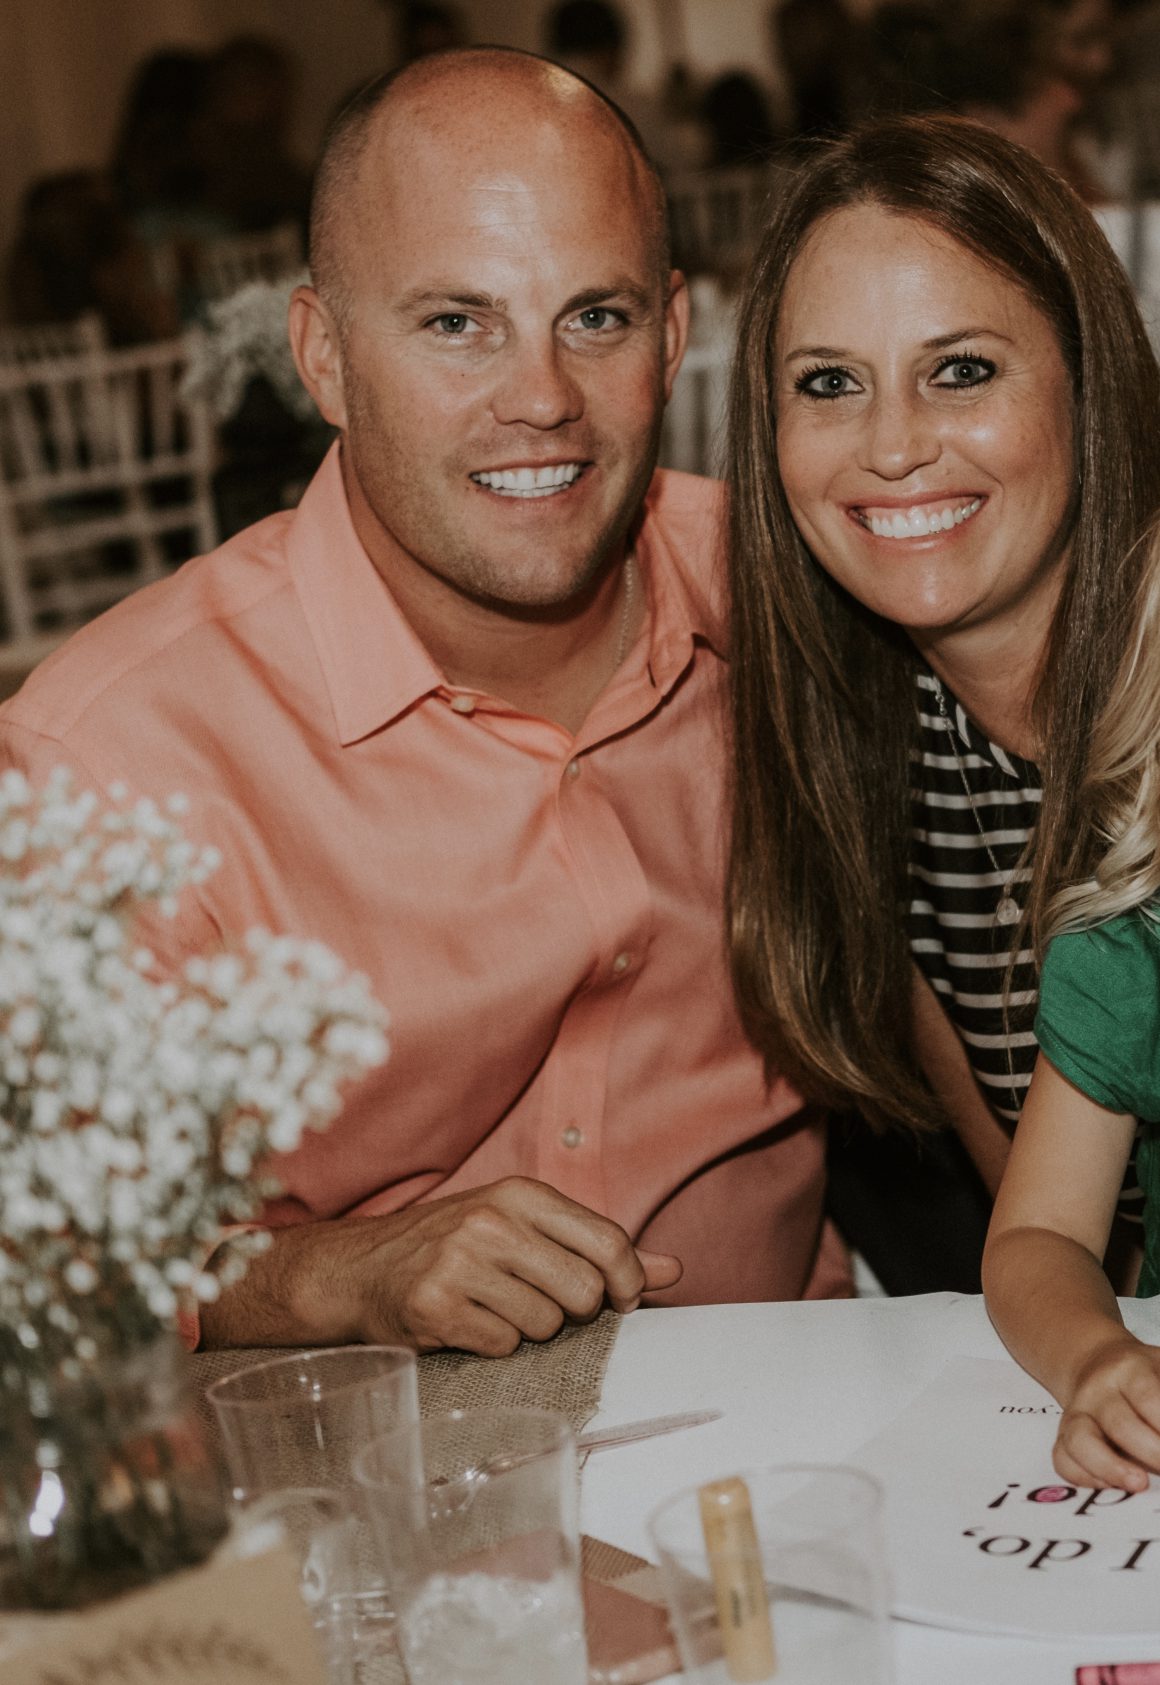 Cody and Tara Newton are key Bonvera leaders who believe in Bonvera's mission and vision.